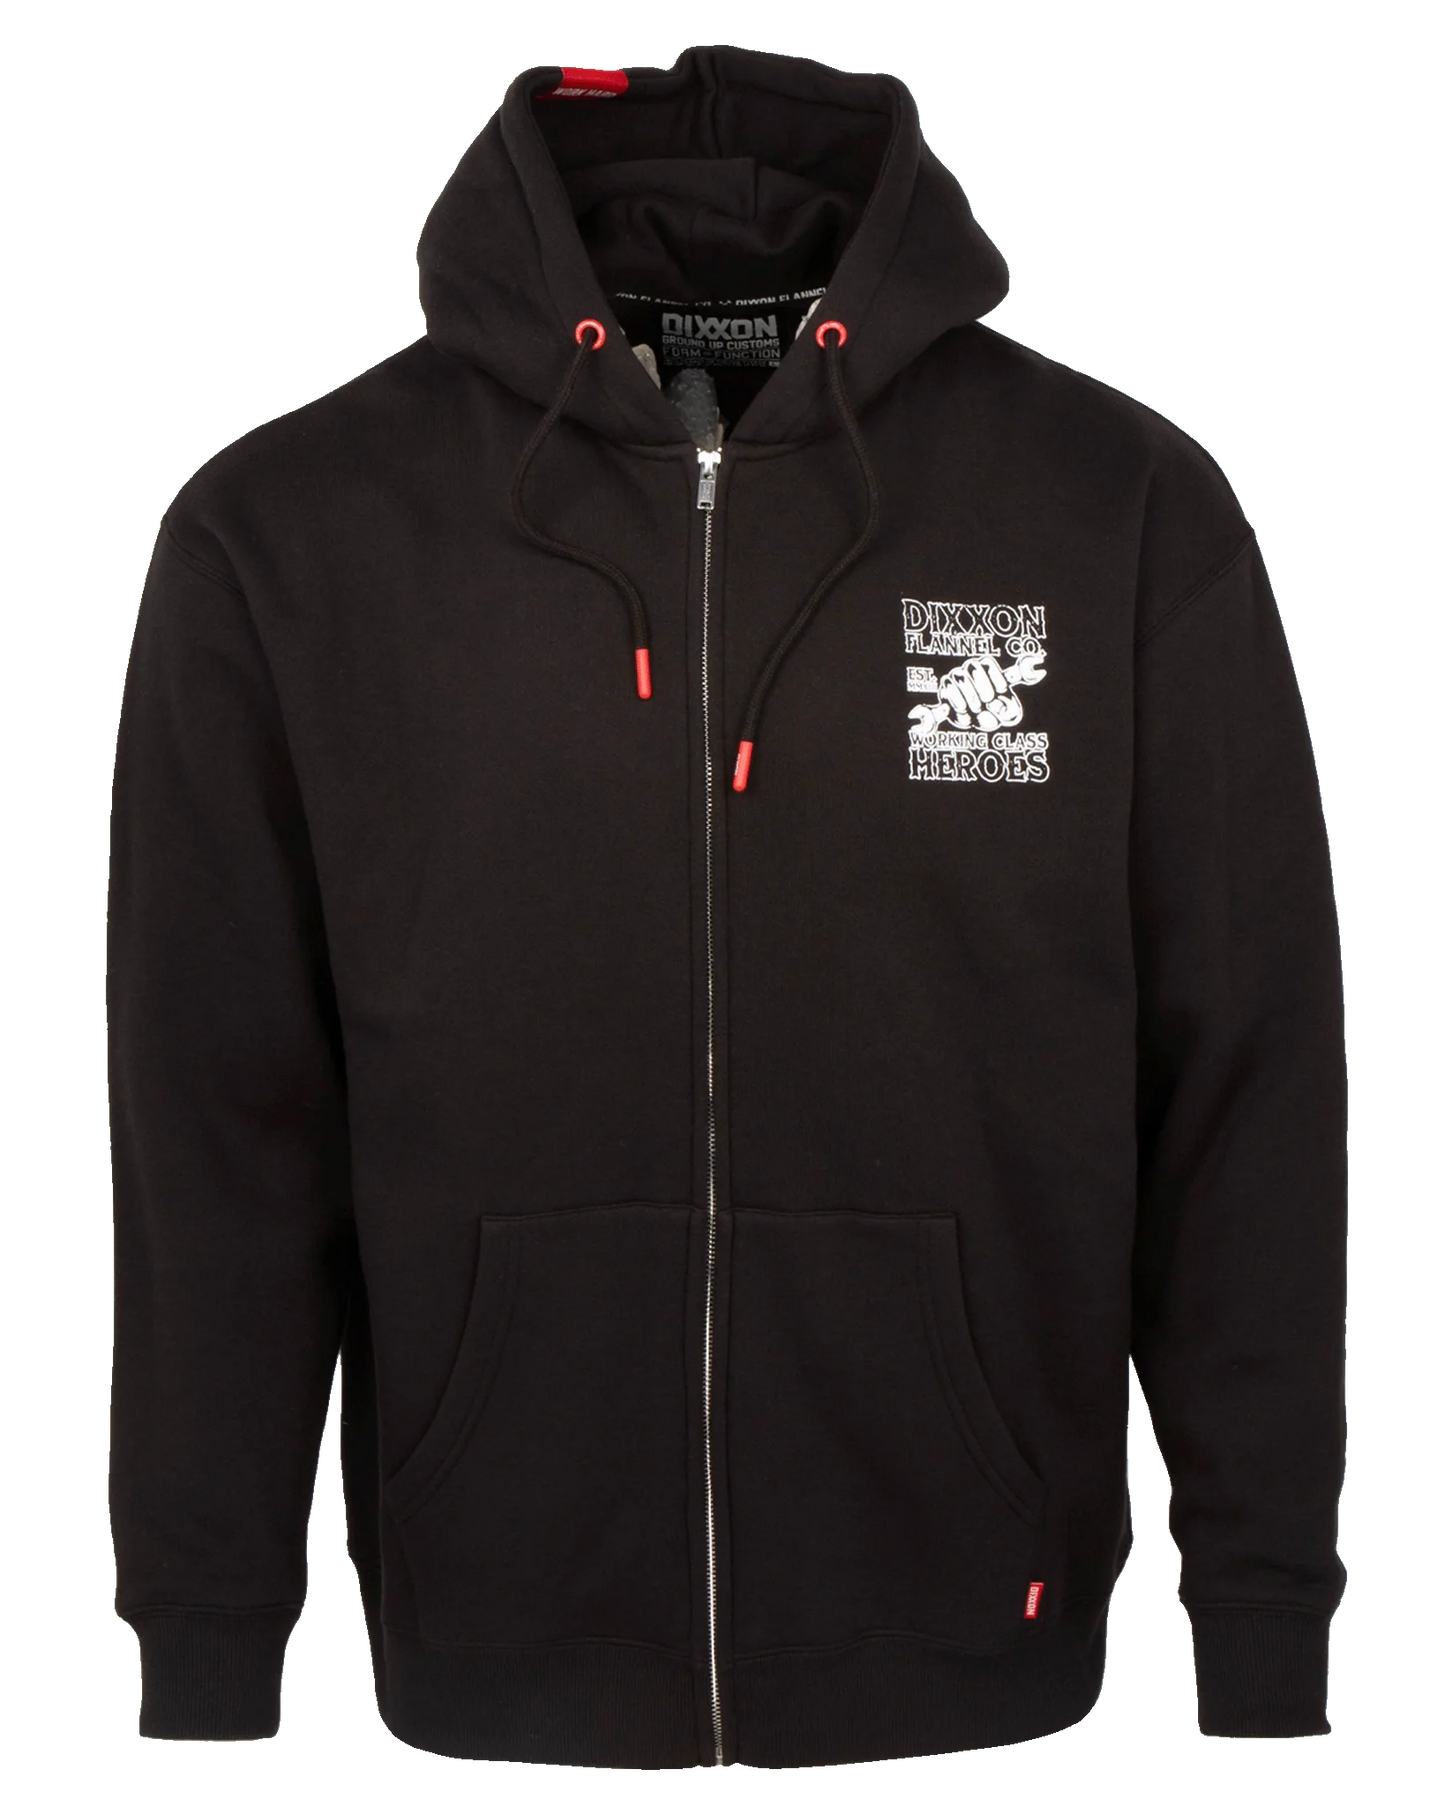 Working Class Fist Zip Up Hoodie by Dixxon Flannel Co.